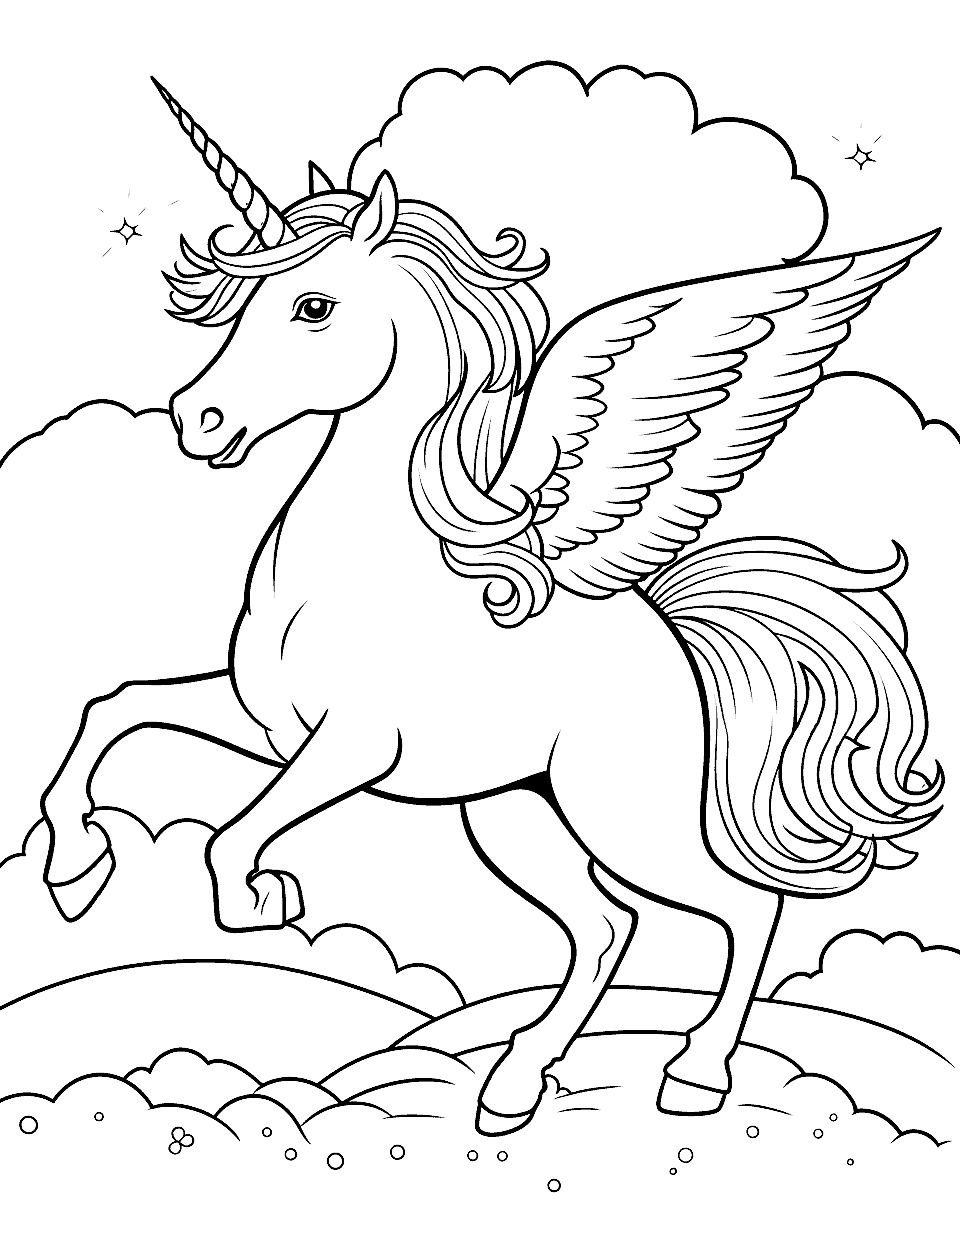 Unicorn Pegasus in Flight Coloring Page - A breathtaking scene featuring a Pegasus unicorn flying over mountains at sunset.